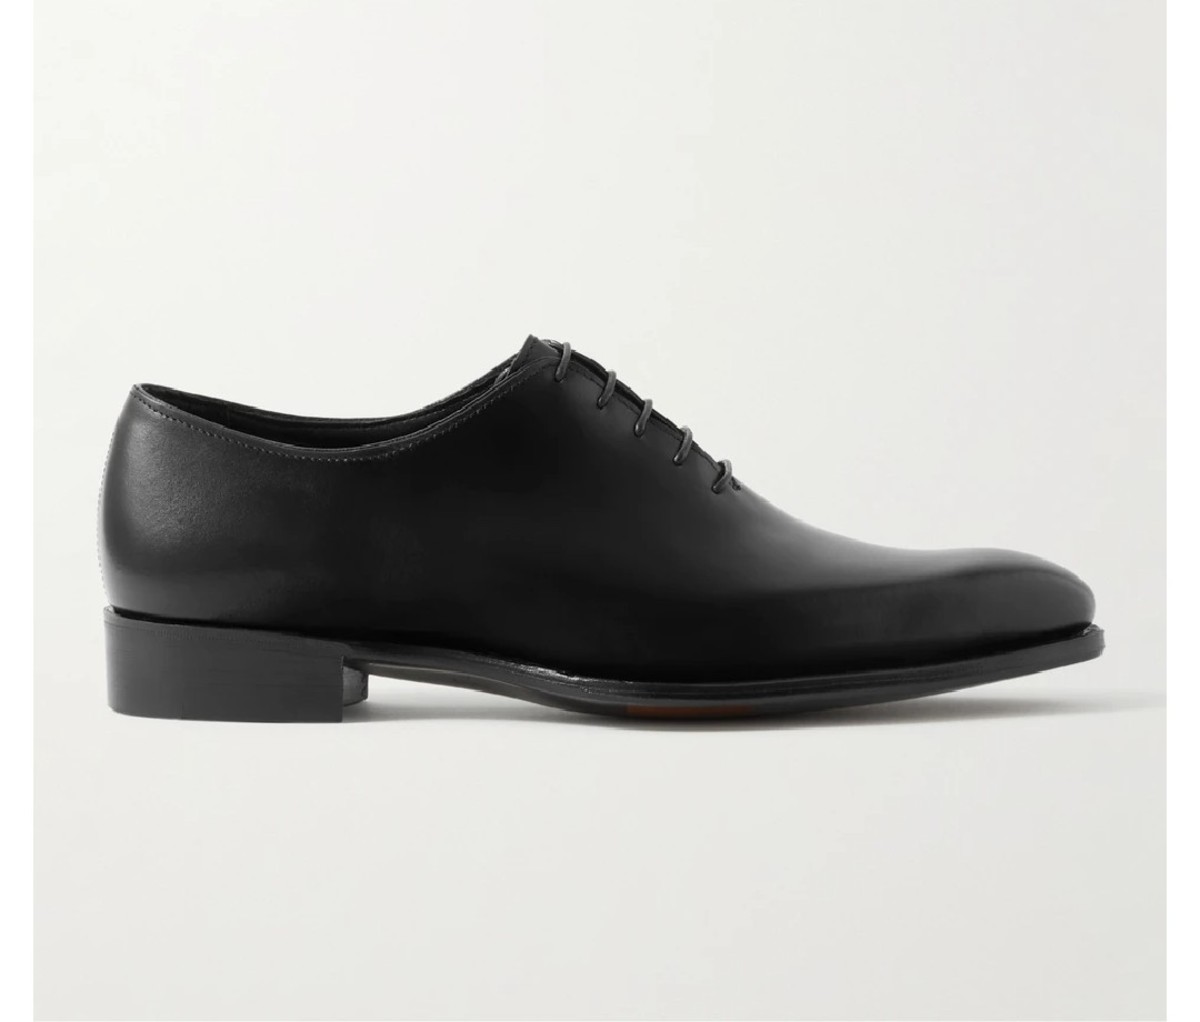 Top 6 Best Leather Shoes For Men (2022) George Cleverley Merlin Whole-Cut Leather Oxford Shoes